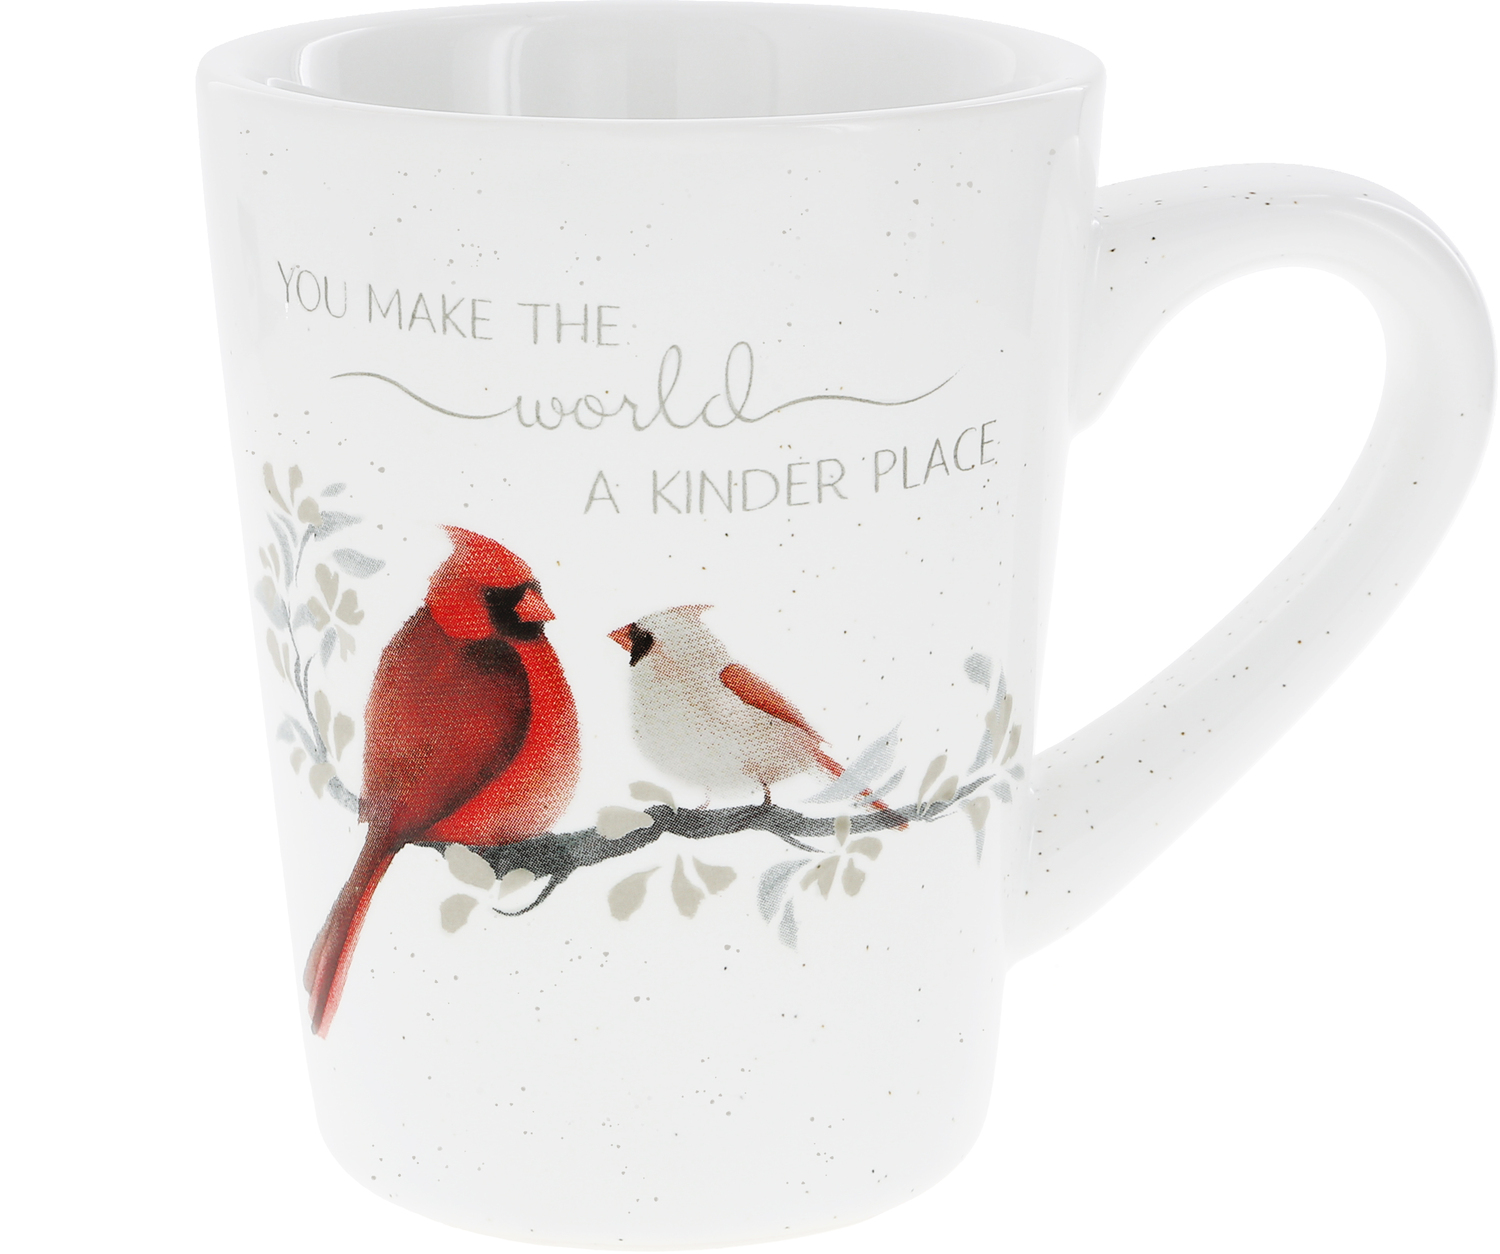 Kinder Place by Always by Your Side - Kinder Place - 13 oz Cup